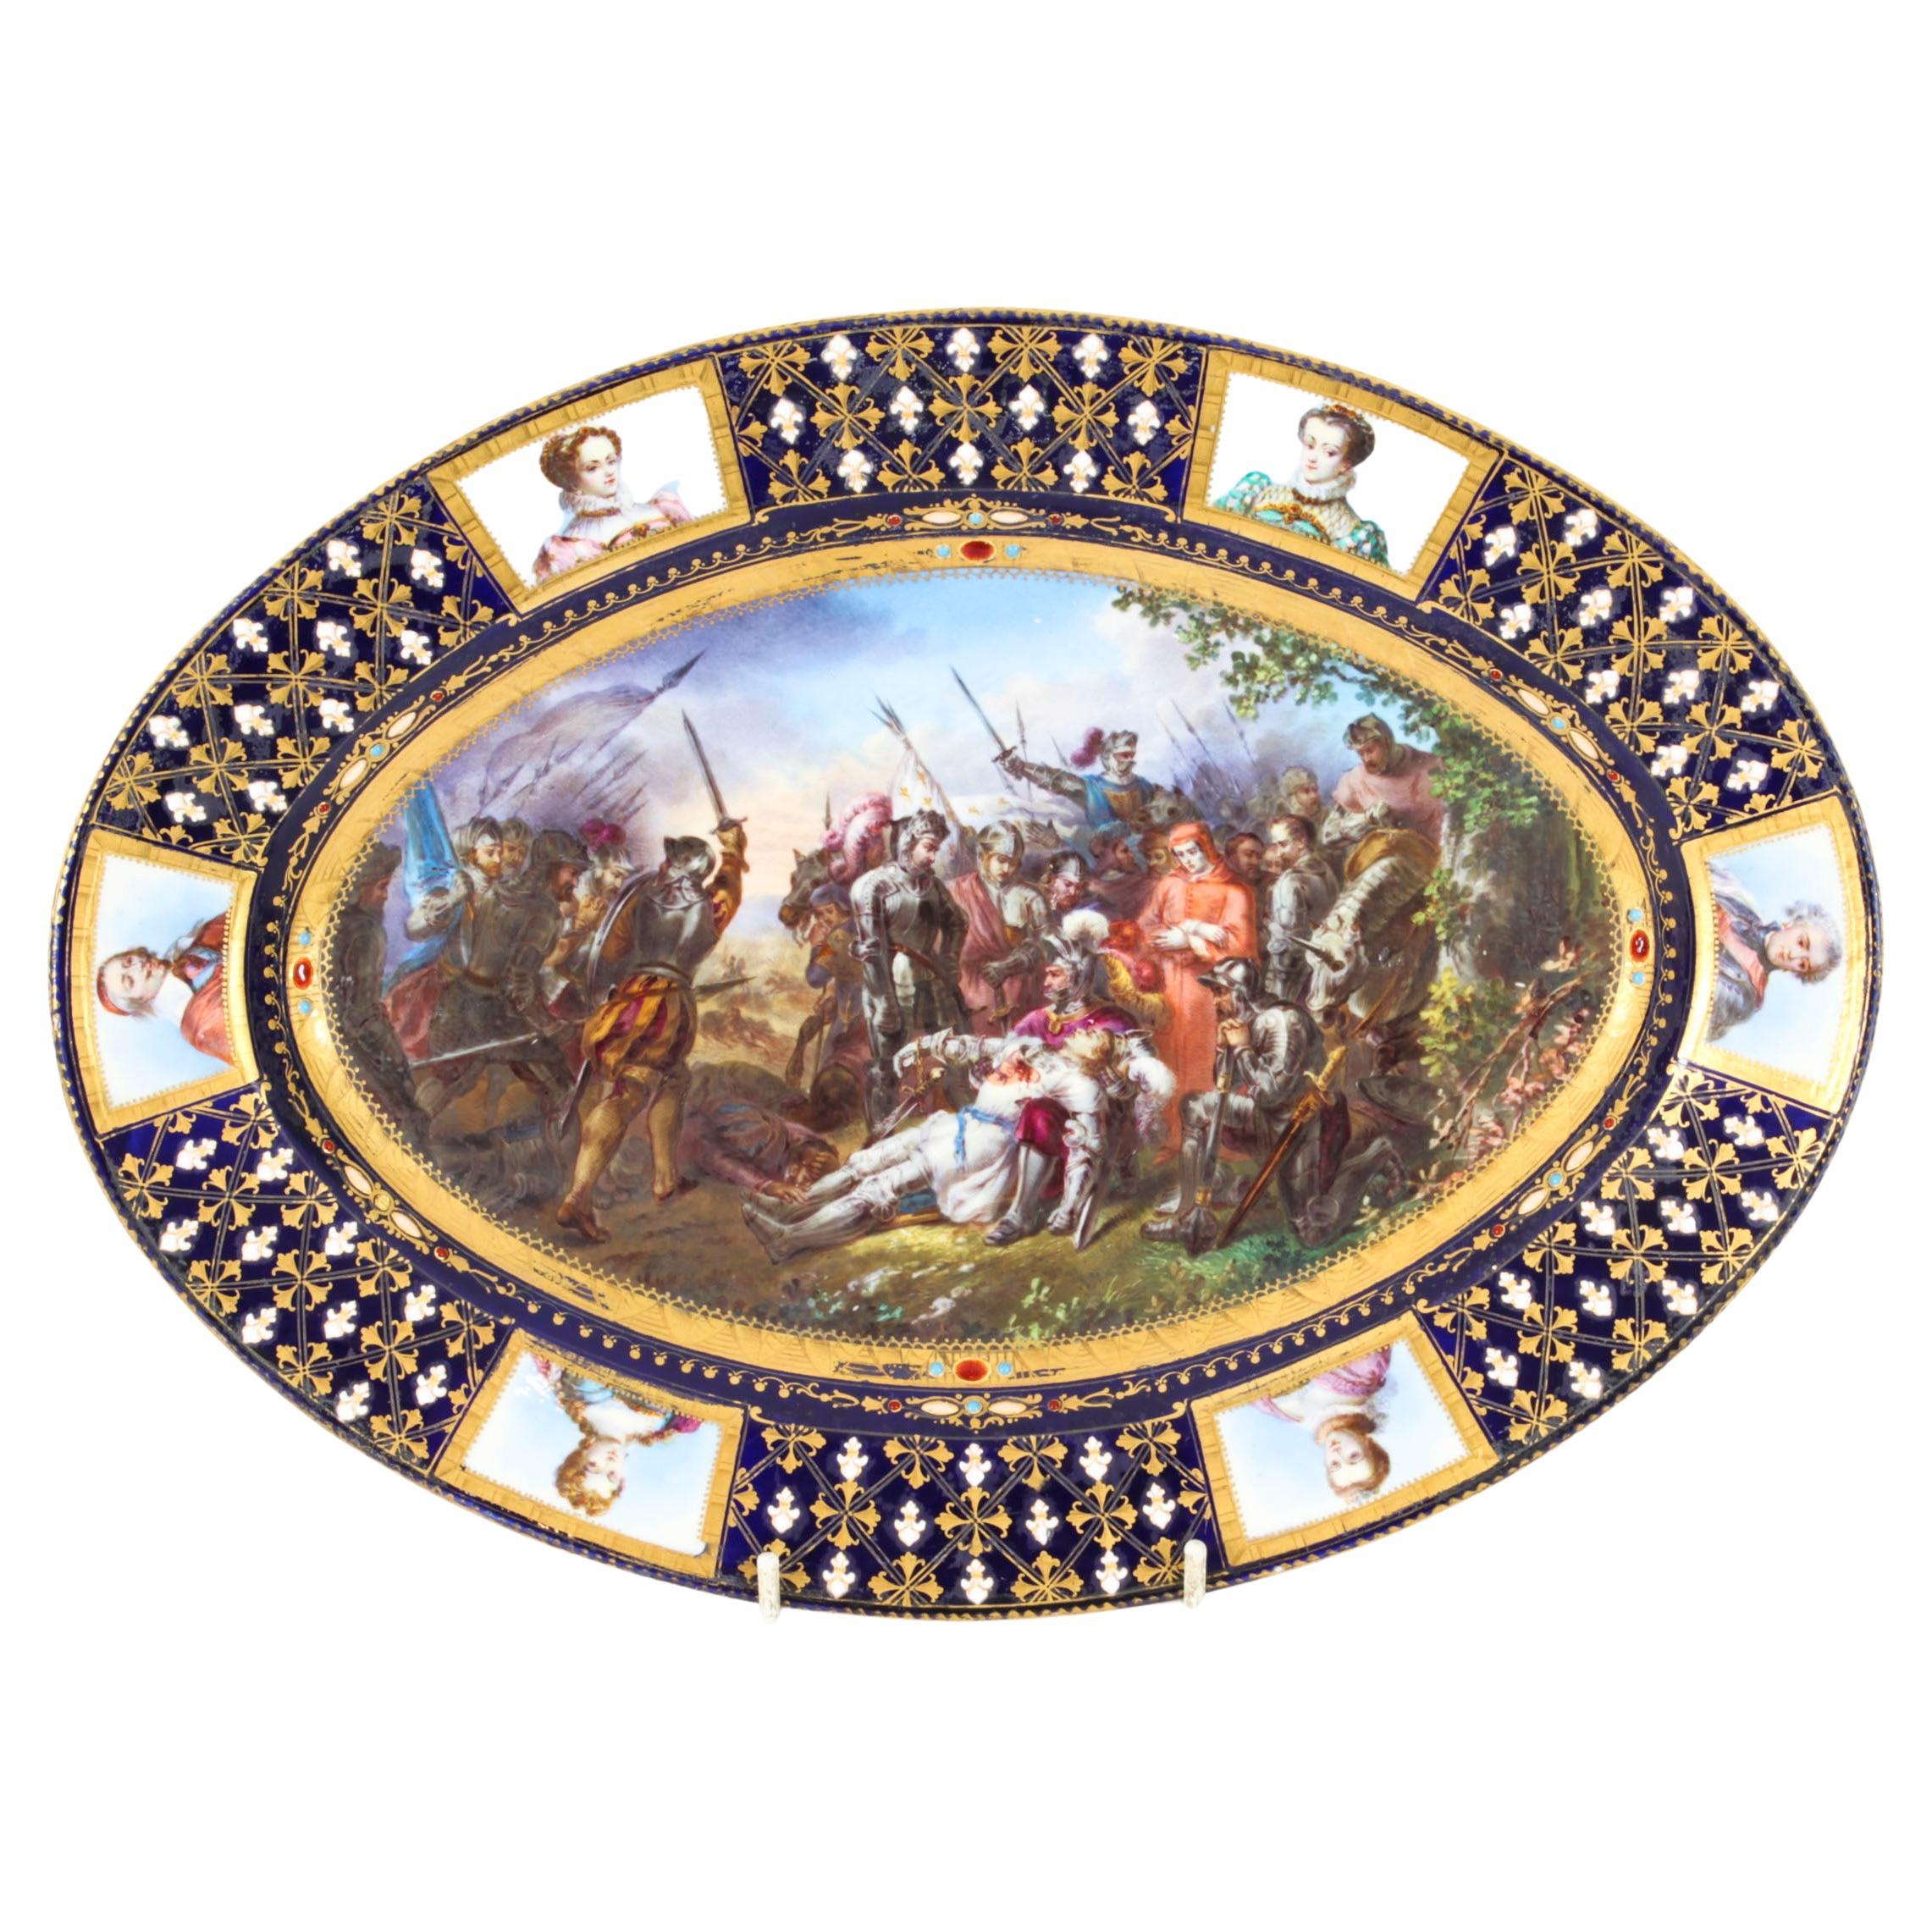 Antique French Sevres Oval Porcelain Dish, Late 18th Century